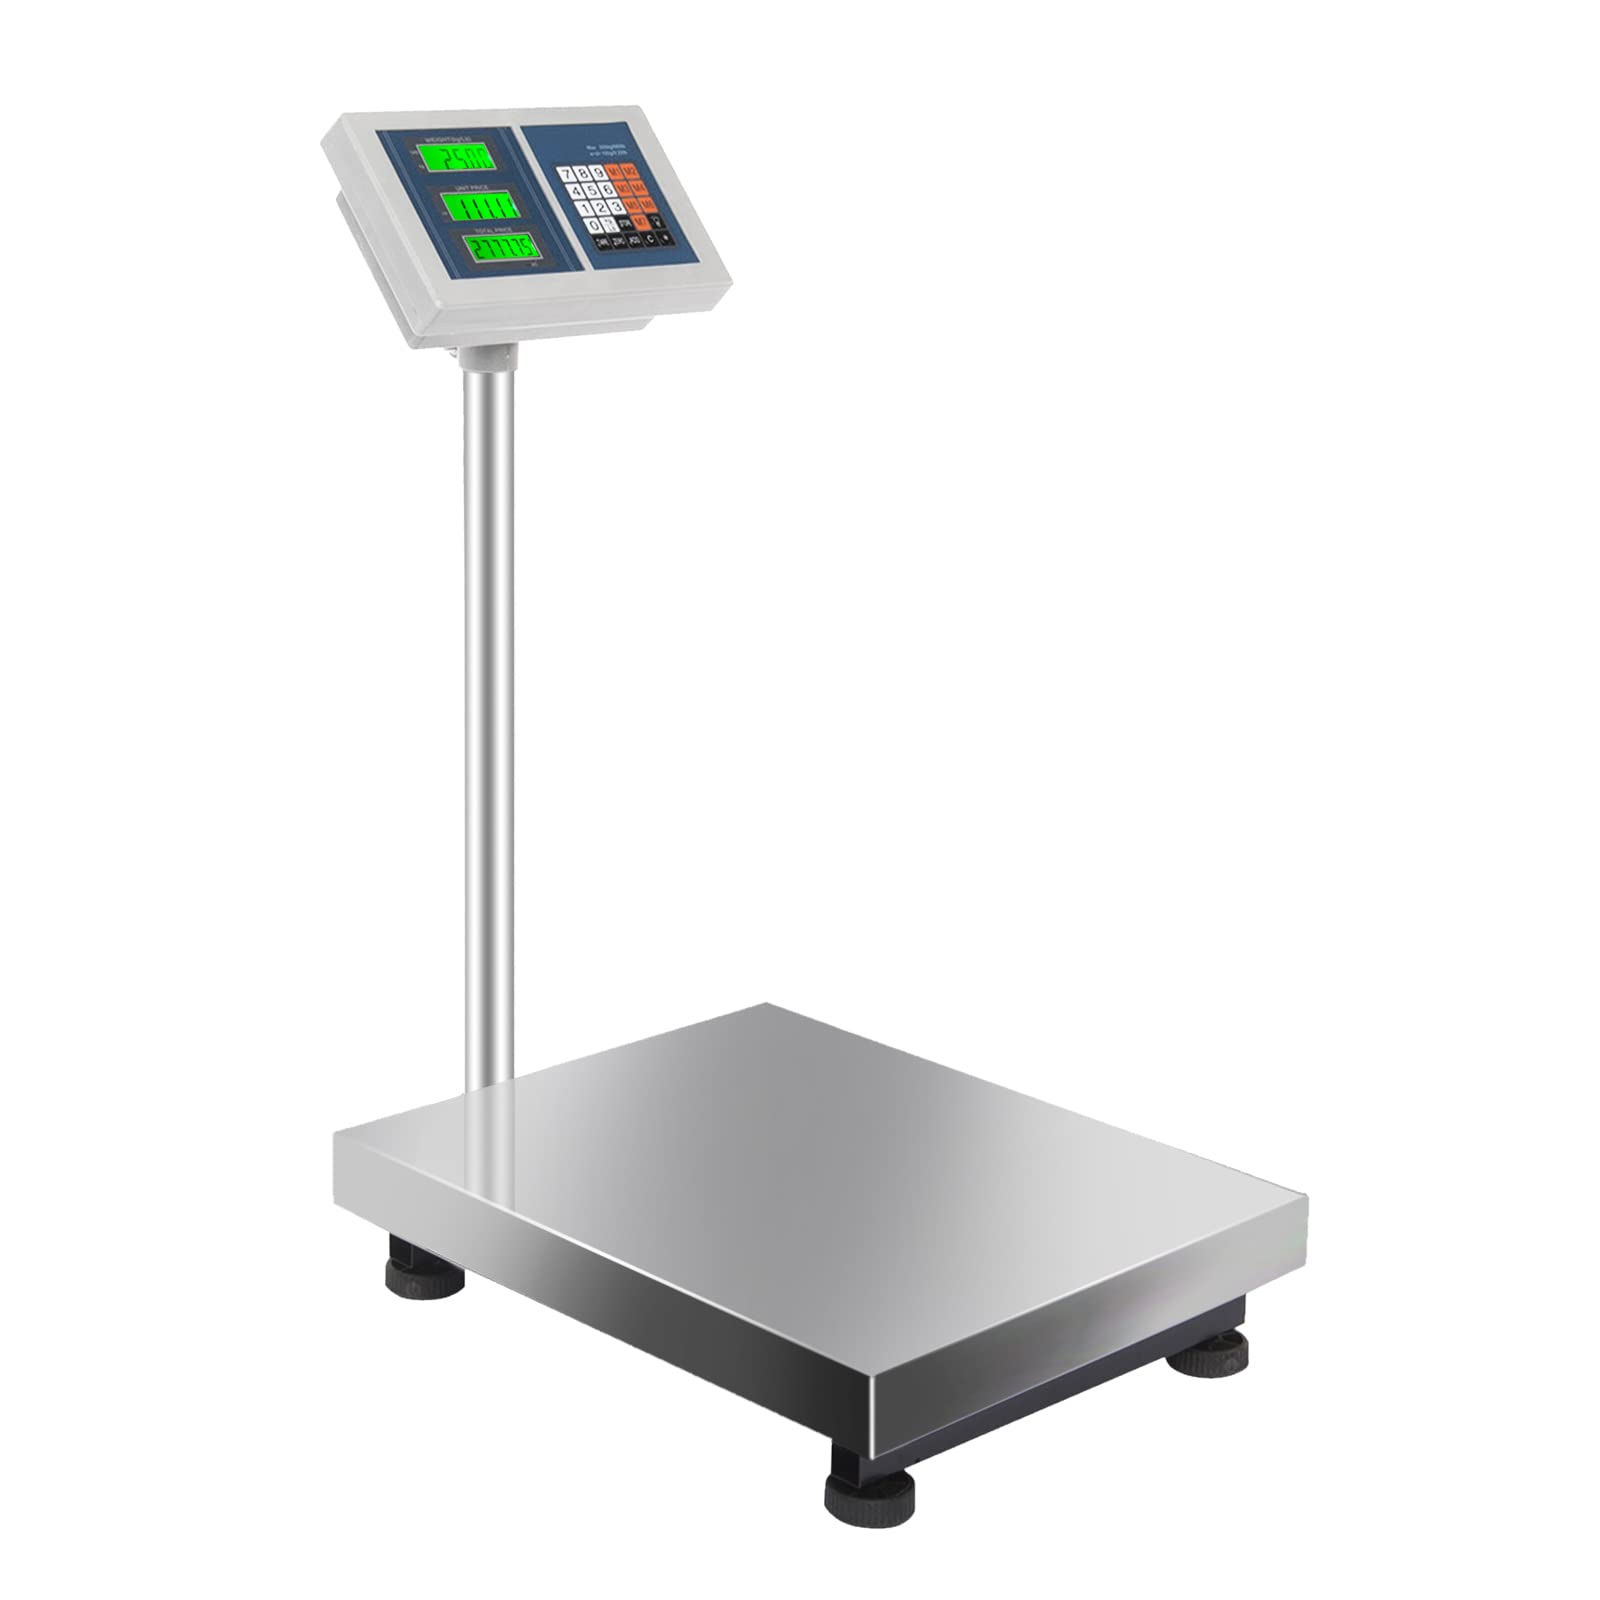 Giantex 660 LBS Weight Computing Platform Scale, with LB/KG Switchable, AC/DC Power Supply